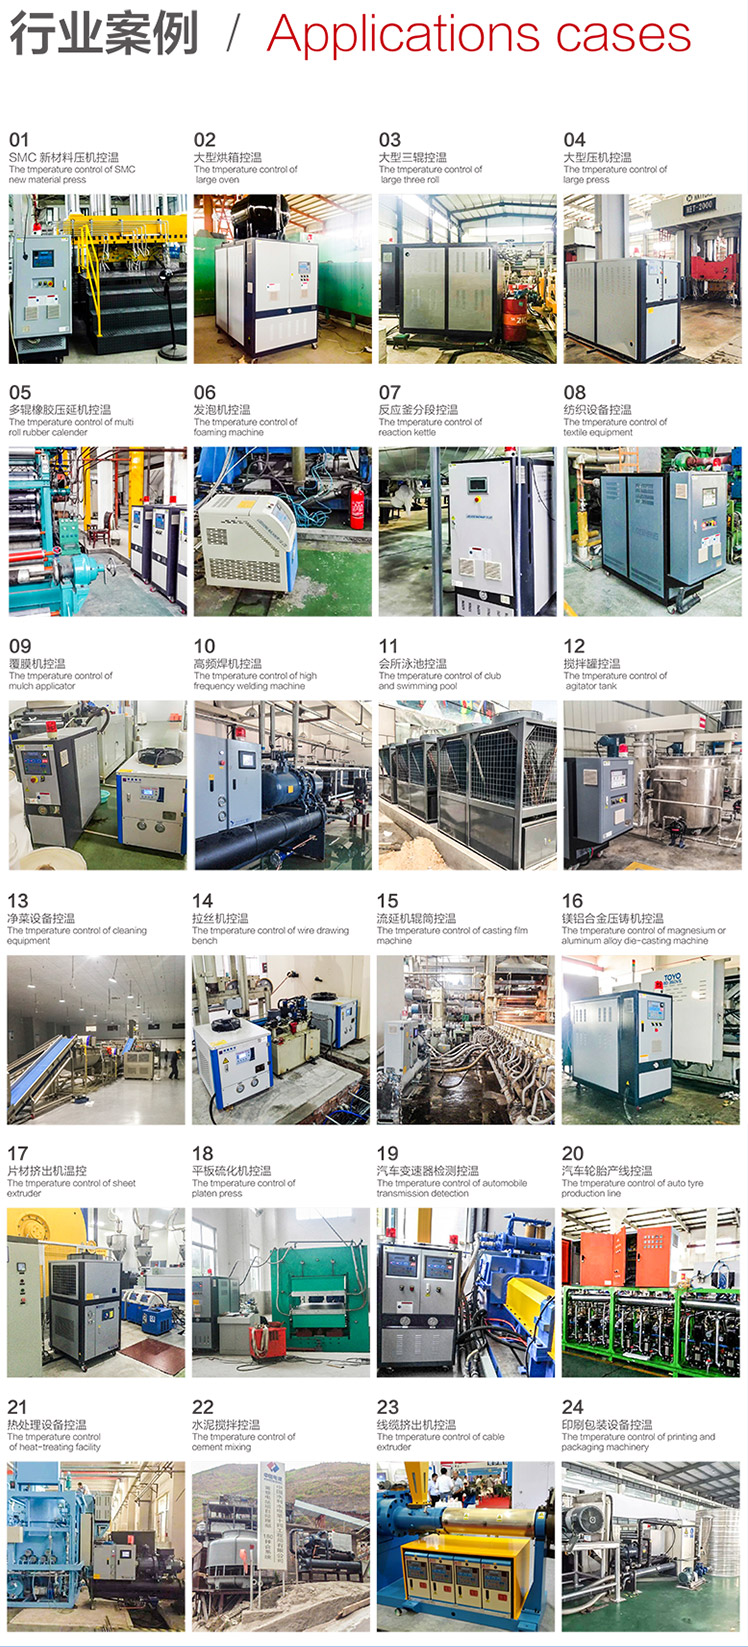 Industrial oil cooler air-cooled oil cooler hydraulic station processing center refrigeration oil cooler